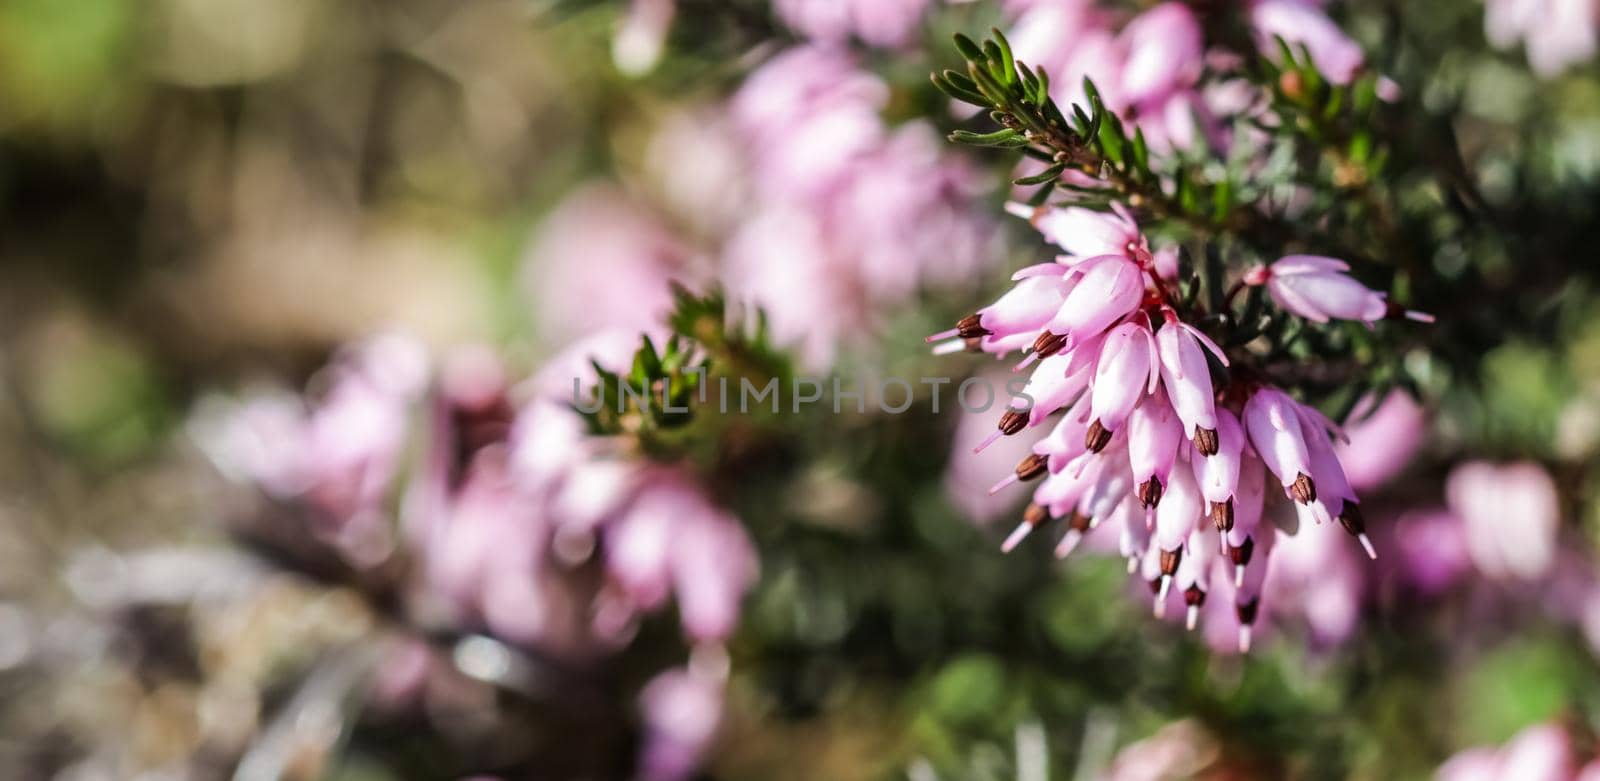 Pink Erica carnea flowers (winter Heath) in the garden in early spring by Olayola